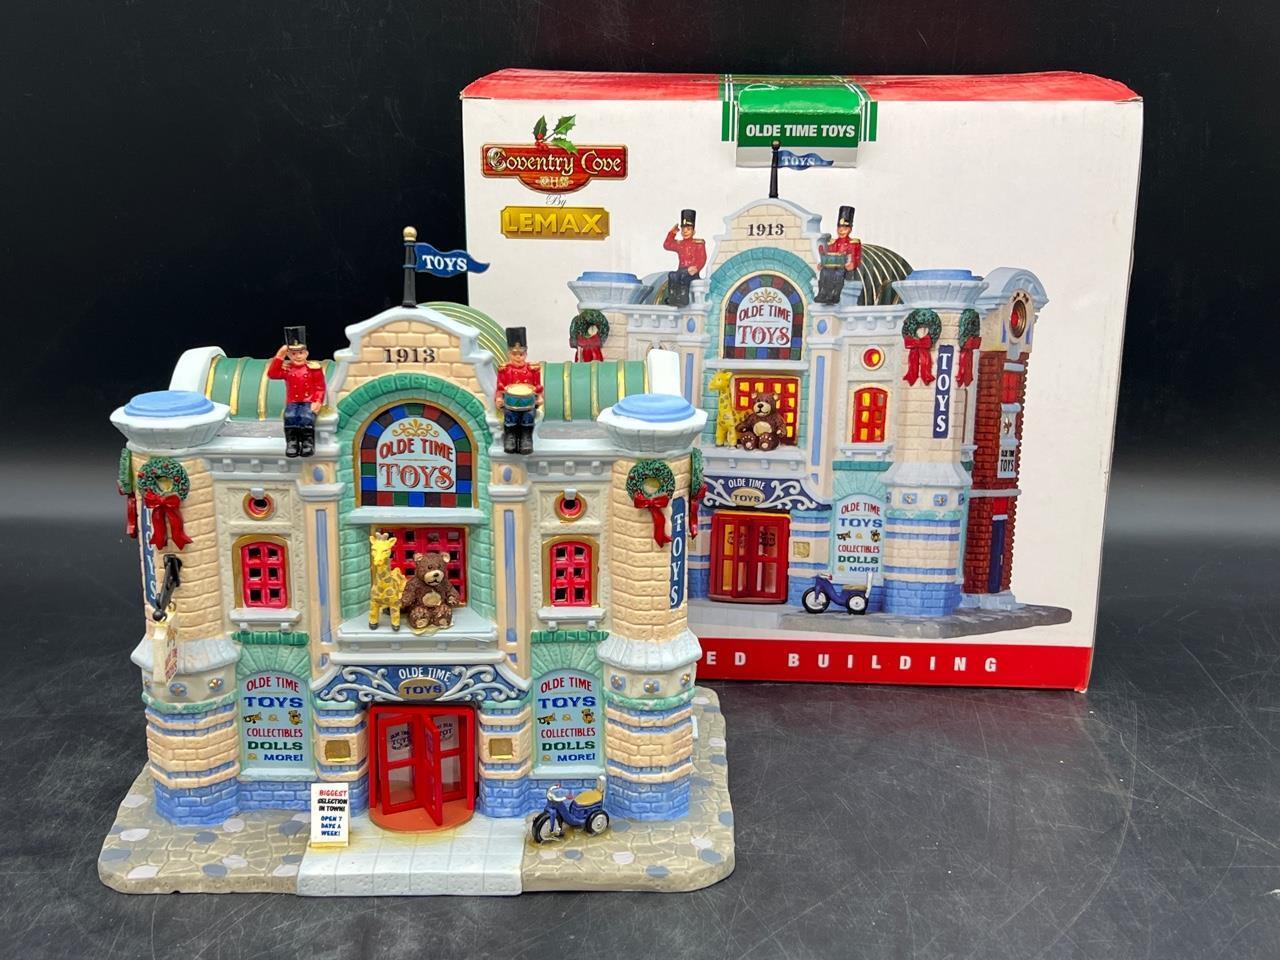 Lemax Village Collection Coventry Cove Olde Time Toys Lighted Building 05094